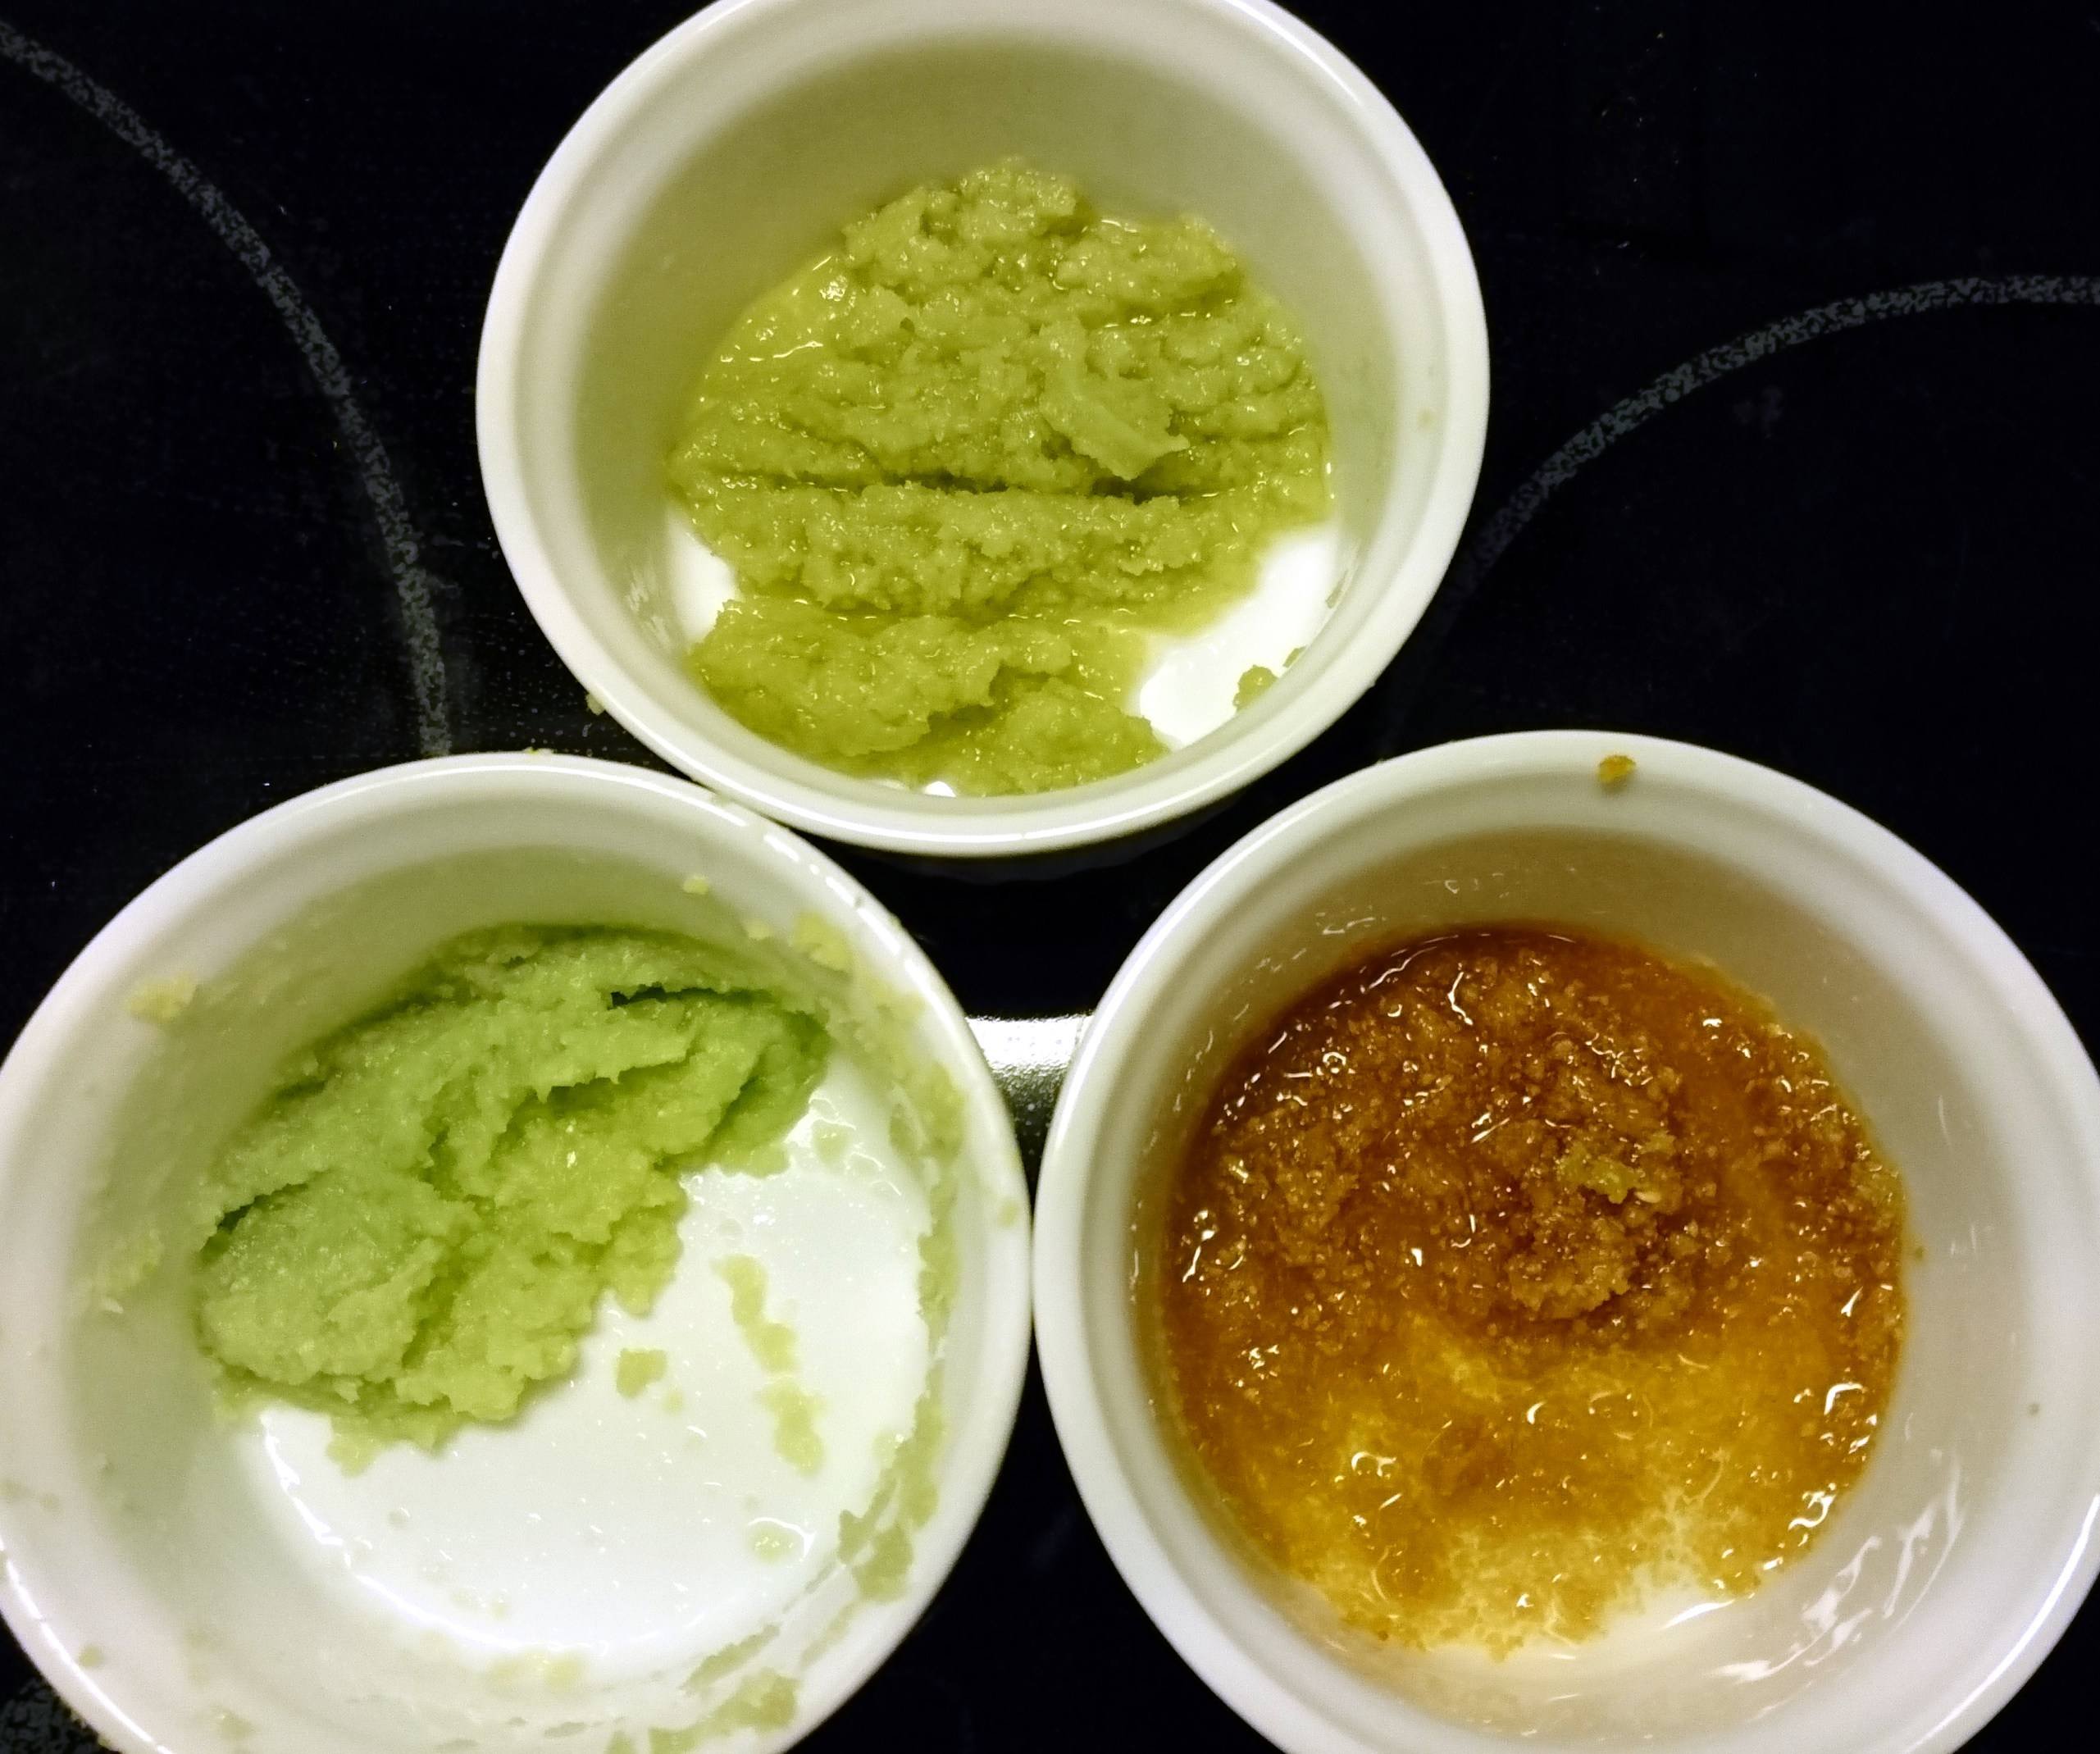 Ginger garlic paste. Clockwise starting lower right: Raw, lightly cooked, browned.